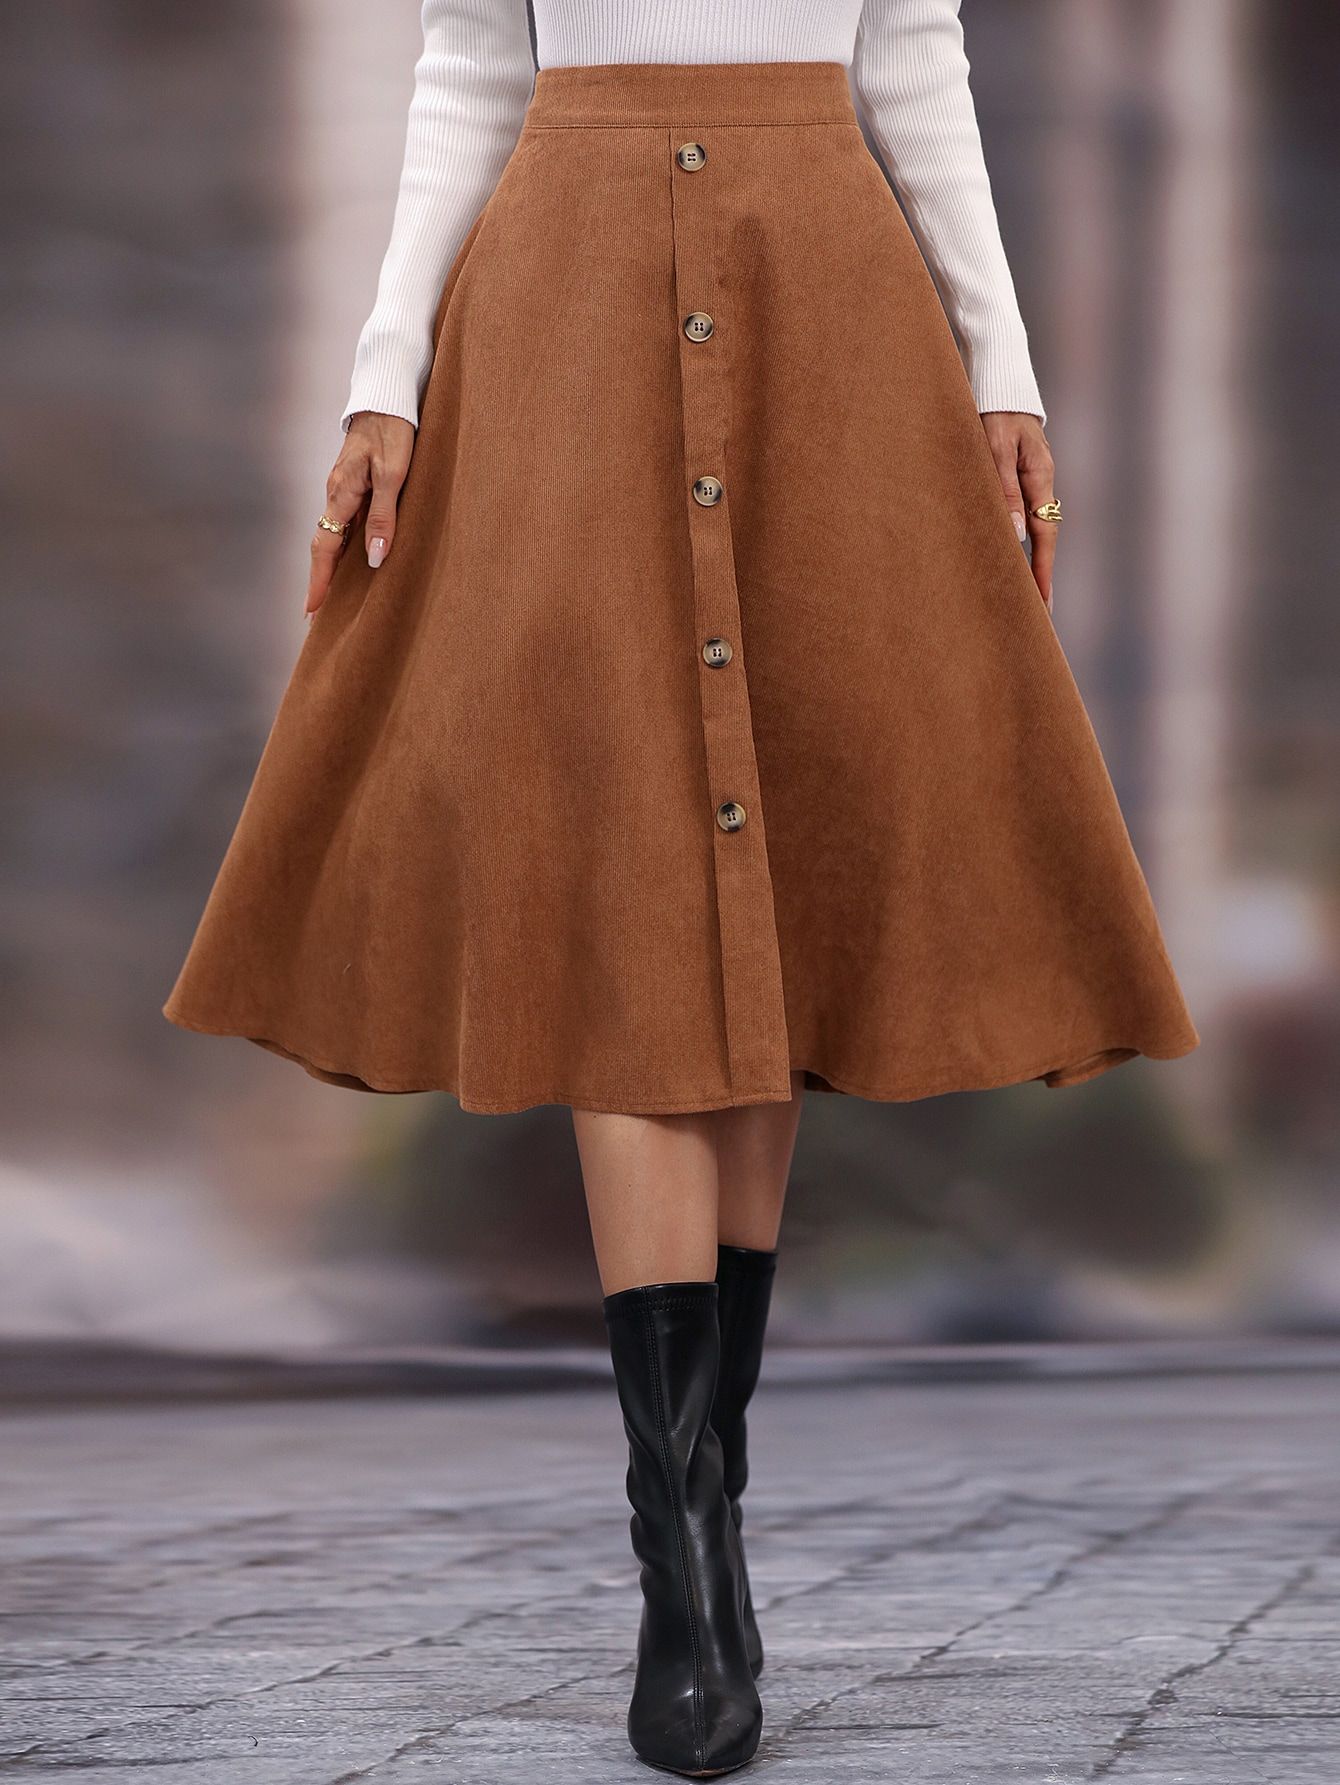 Stylish Button Front Skirt Outfits